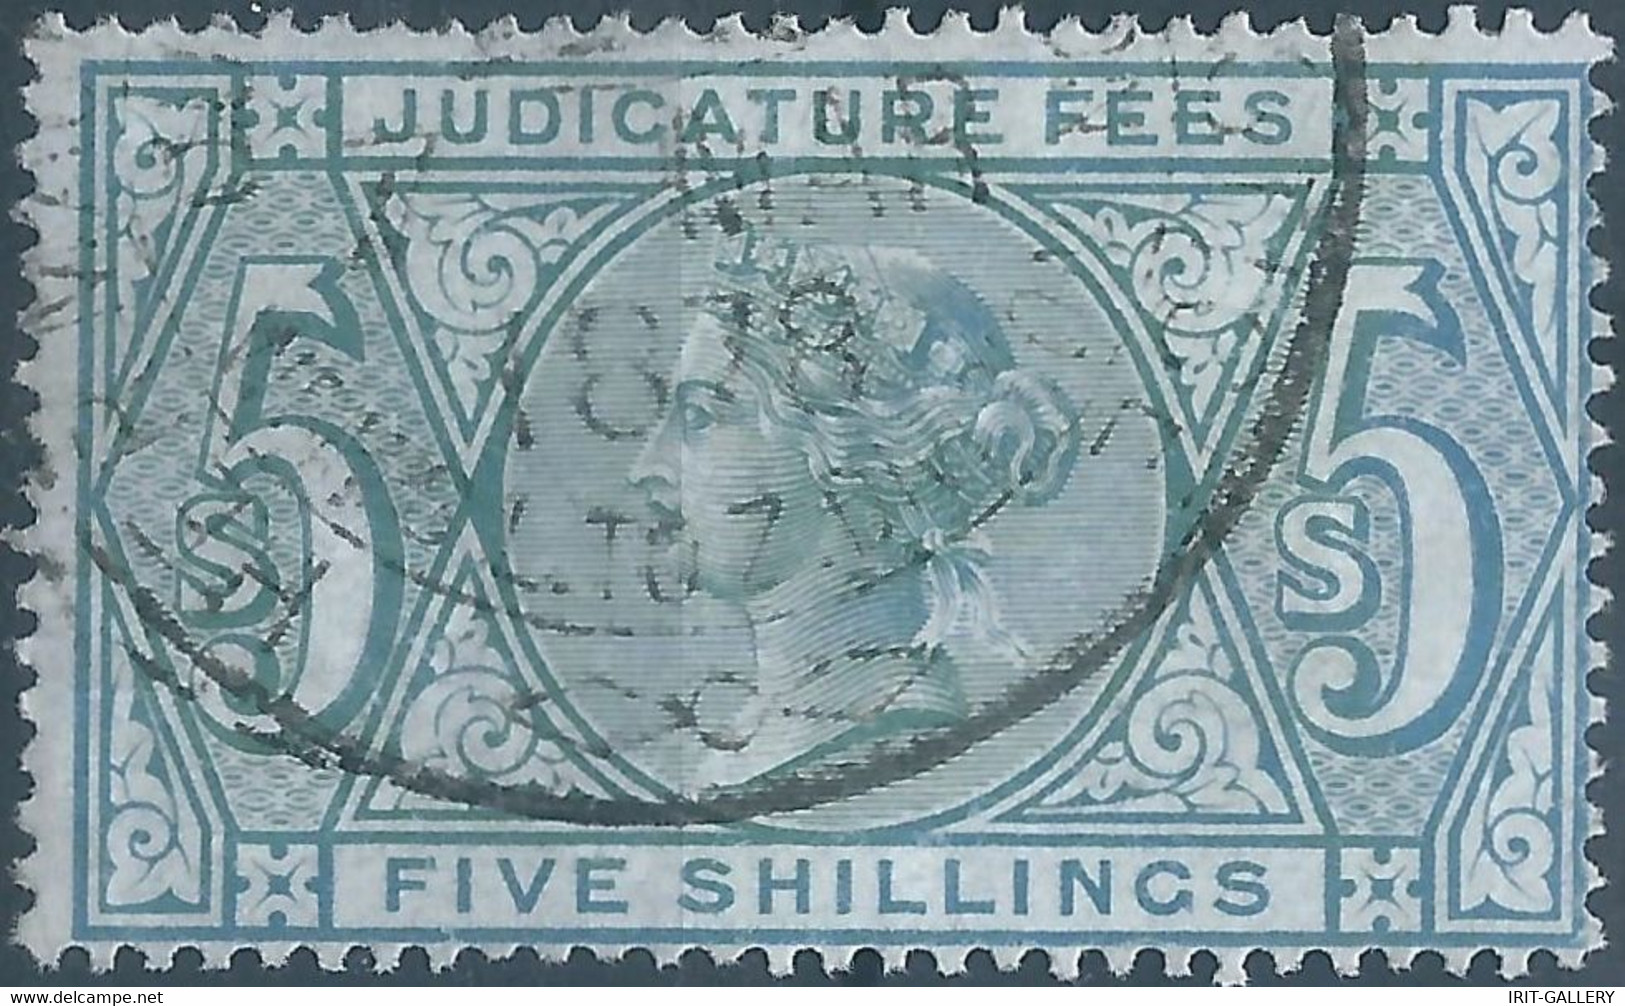 Great Britain-ENGLAND,Queen Victoria,1880-1900 Revenue Stamp Tax Fiscal,JUDICATURE FEES, 5 Shillings,Used - Revenue Stamps